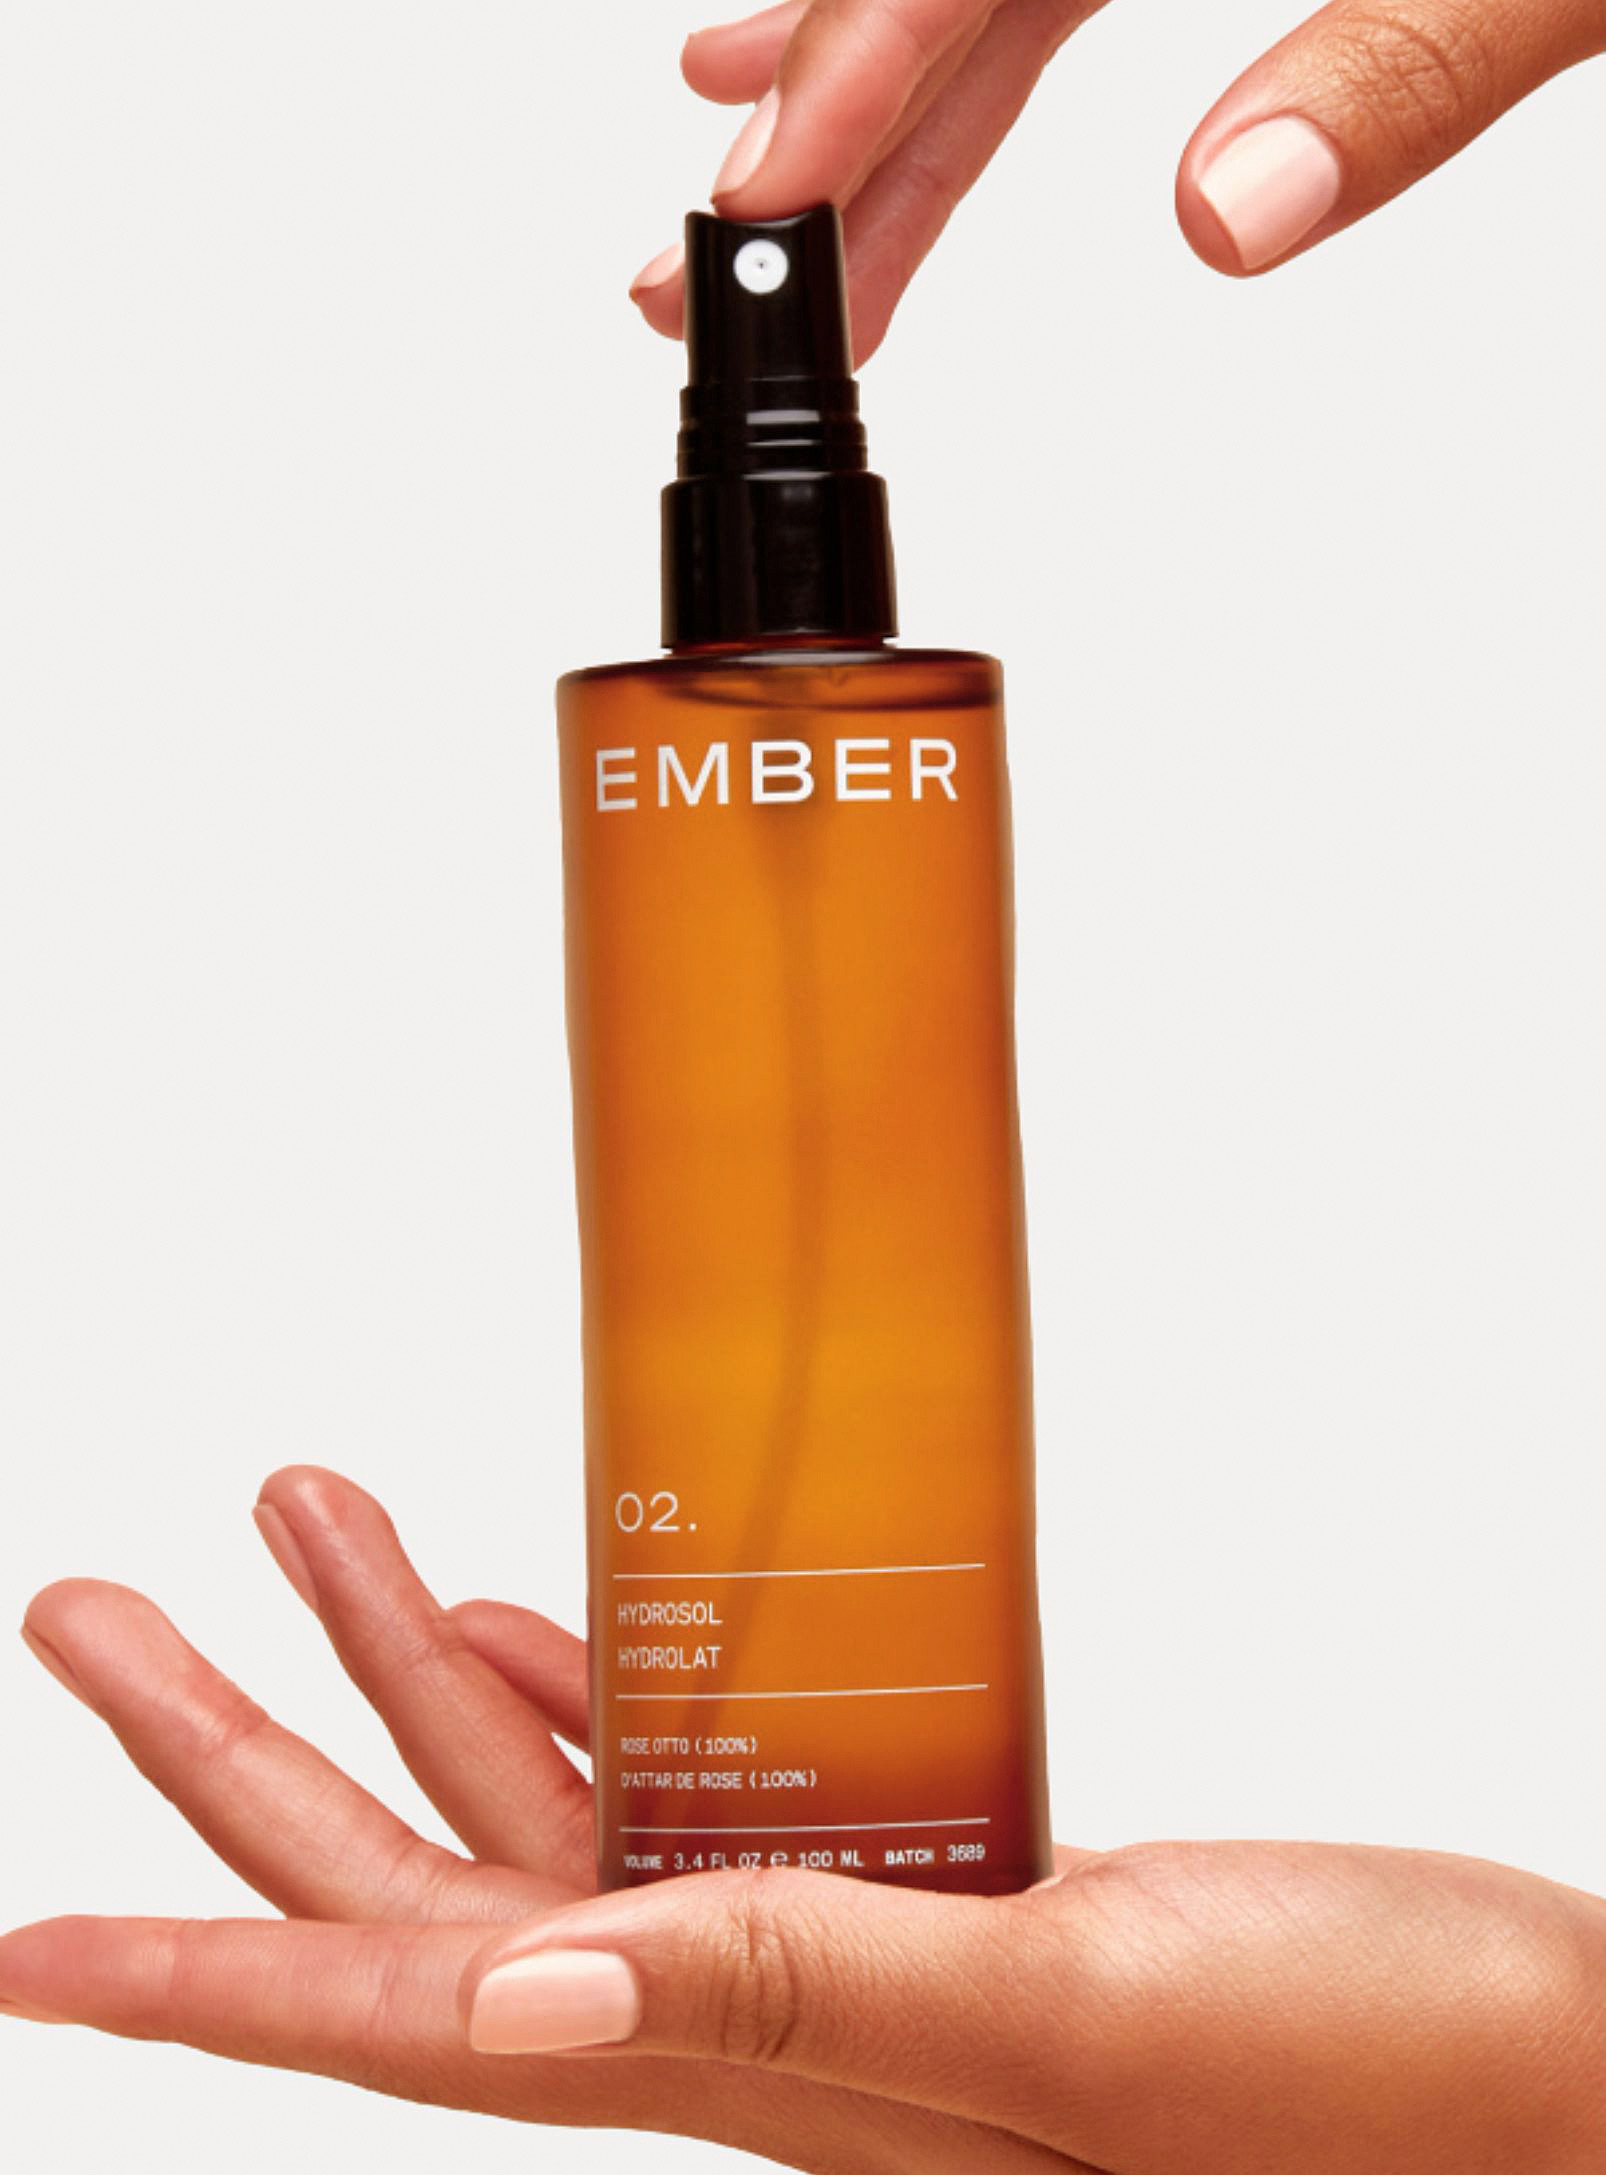 Ember Wellness - 02 Facial Hydrosol with soothing Rose Otto